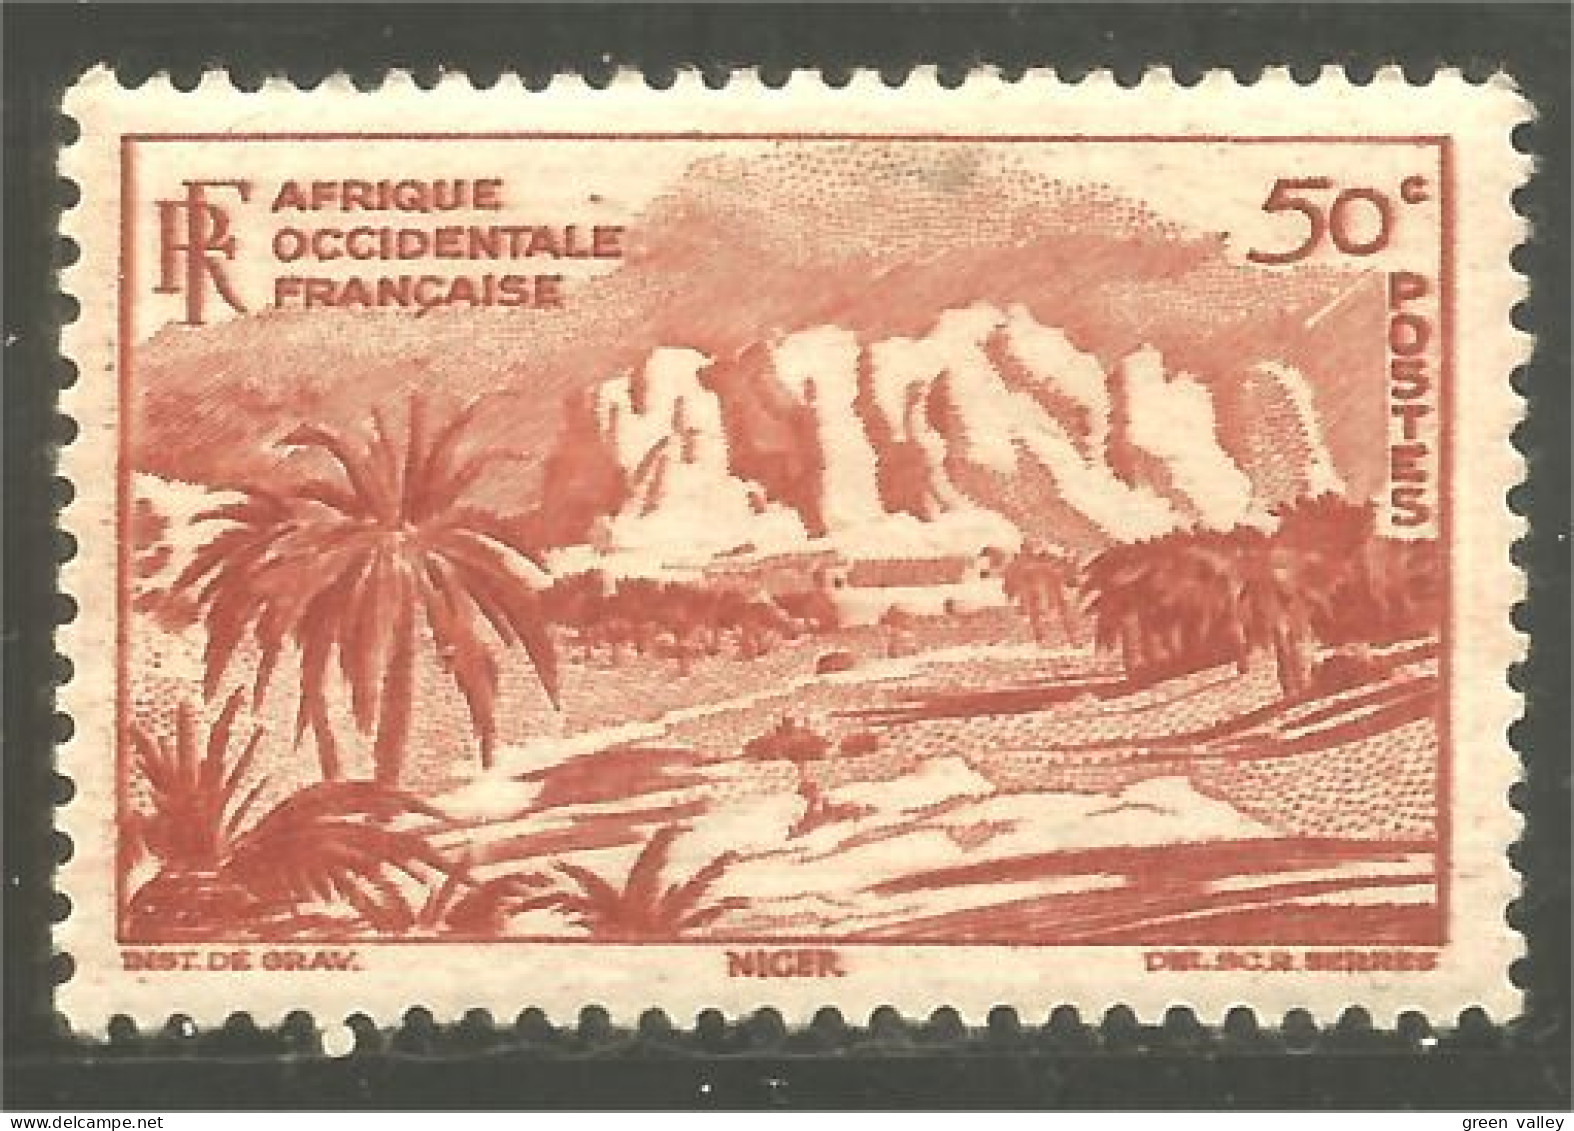 372 AOF Montagnes Niger Mountains MH * Neuf (f3-AEF-387) - Nuovi